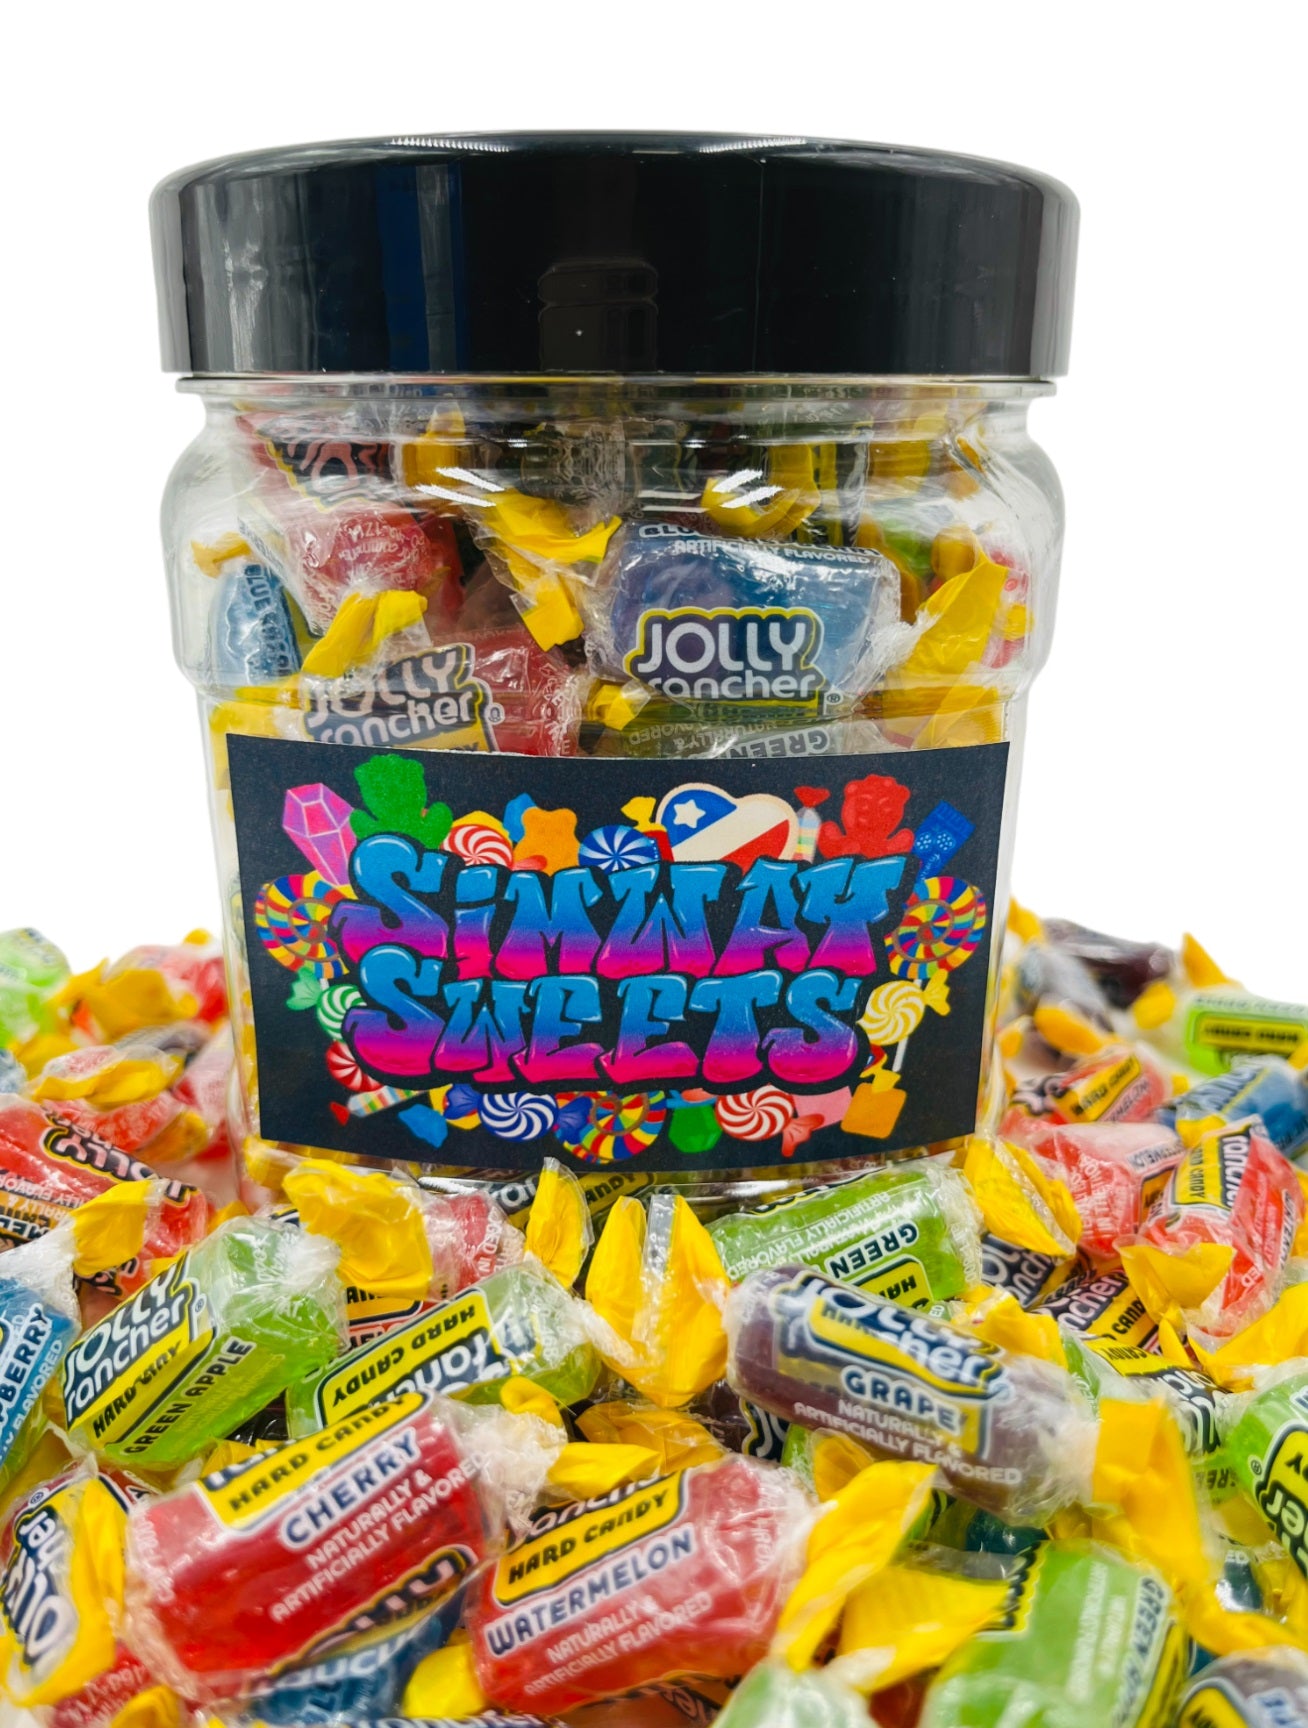 Simway Sweets Jar 775g - Jolly Ranchers - Individually Wrapped American Sweets - Approximately 110 Pieces